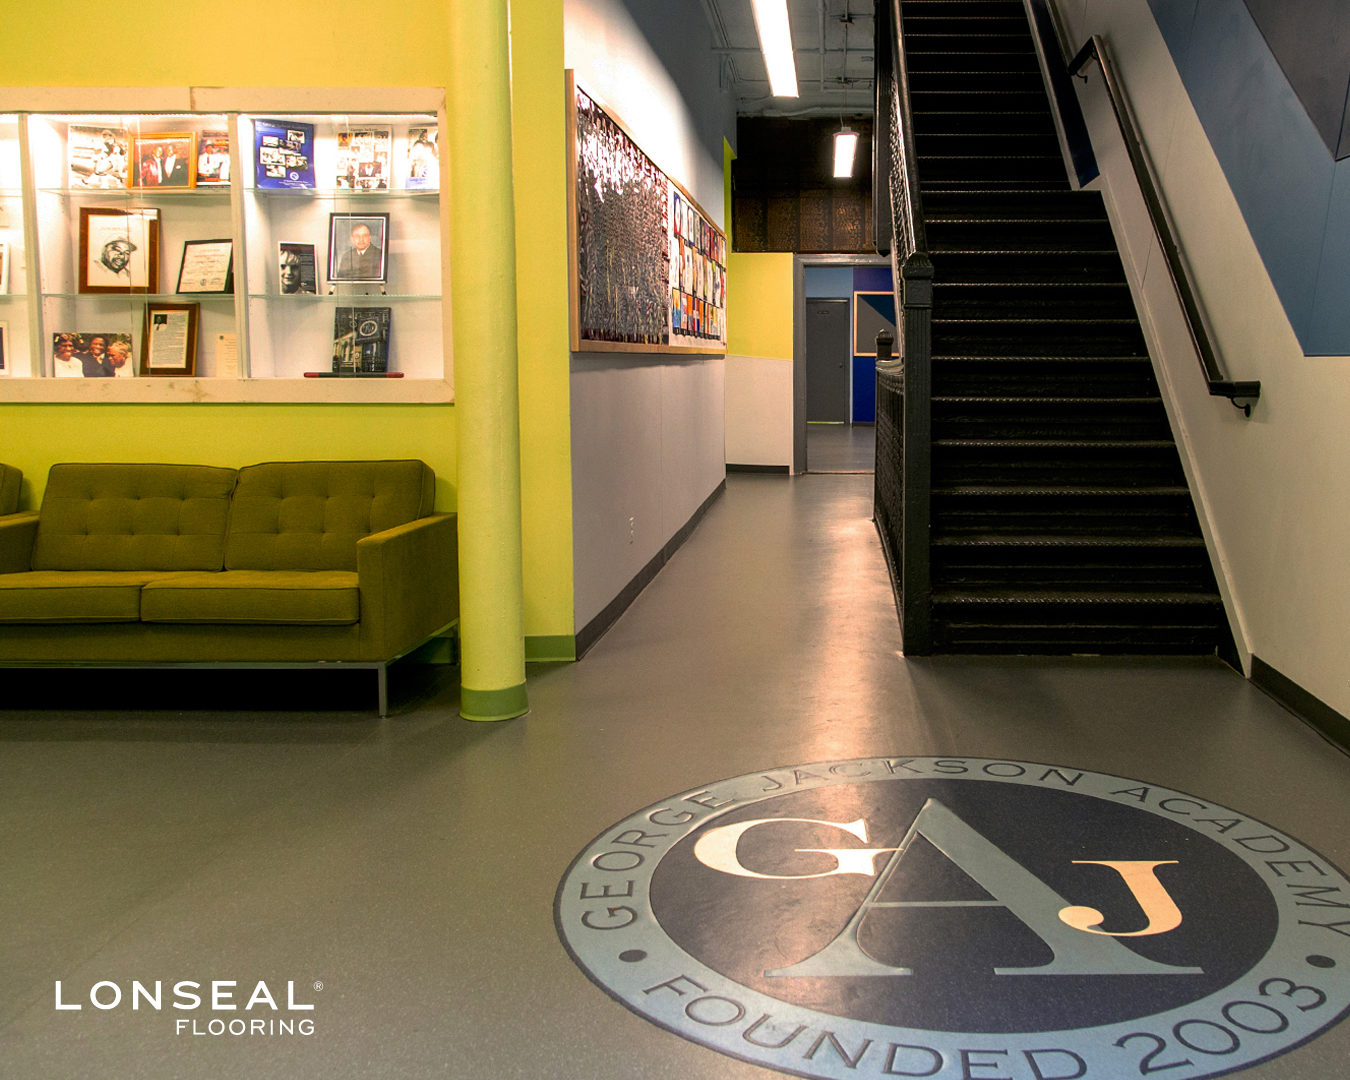 Lonseal, Sheet Vinyl Flooring, LONECO® is an eco-friendly product with recycled content that features Lonseal's exclusive